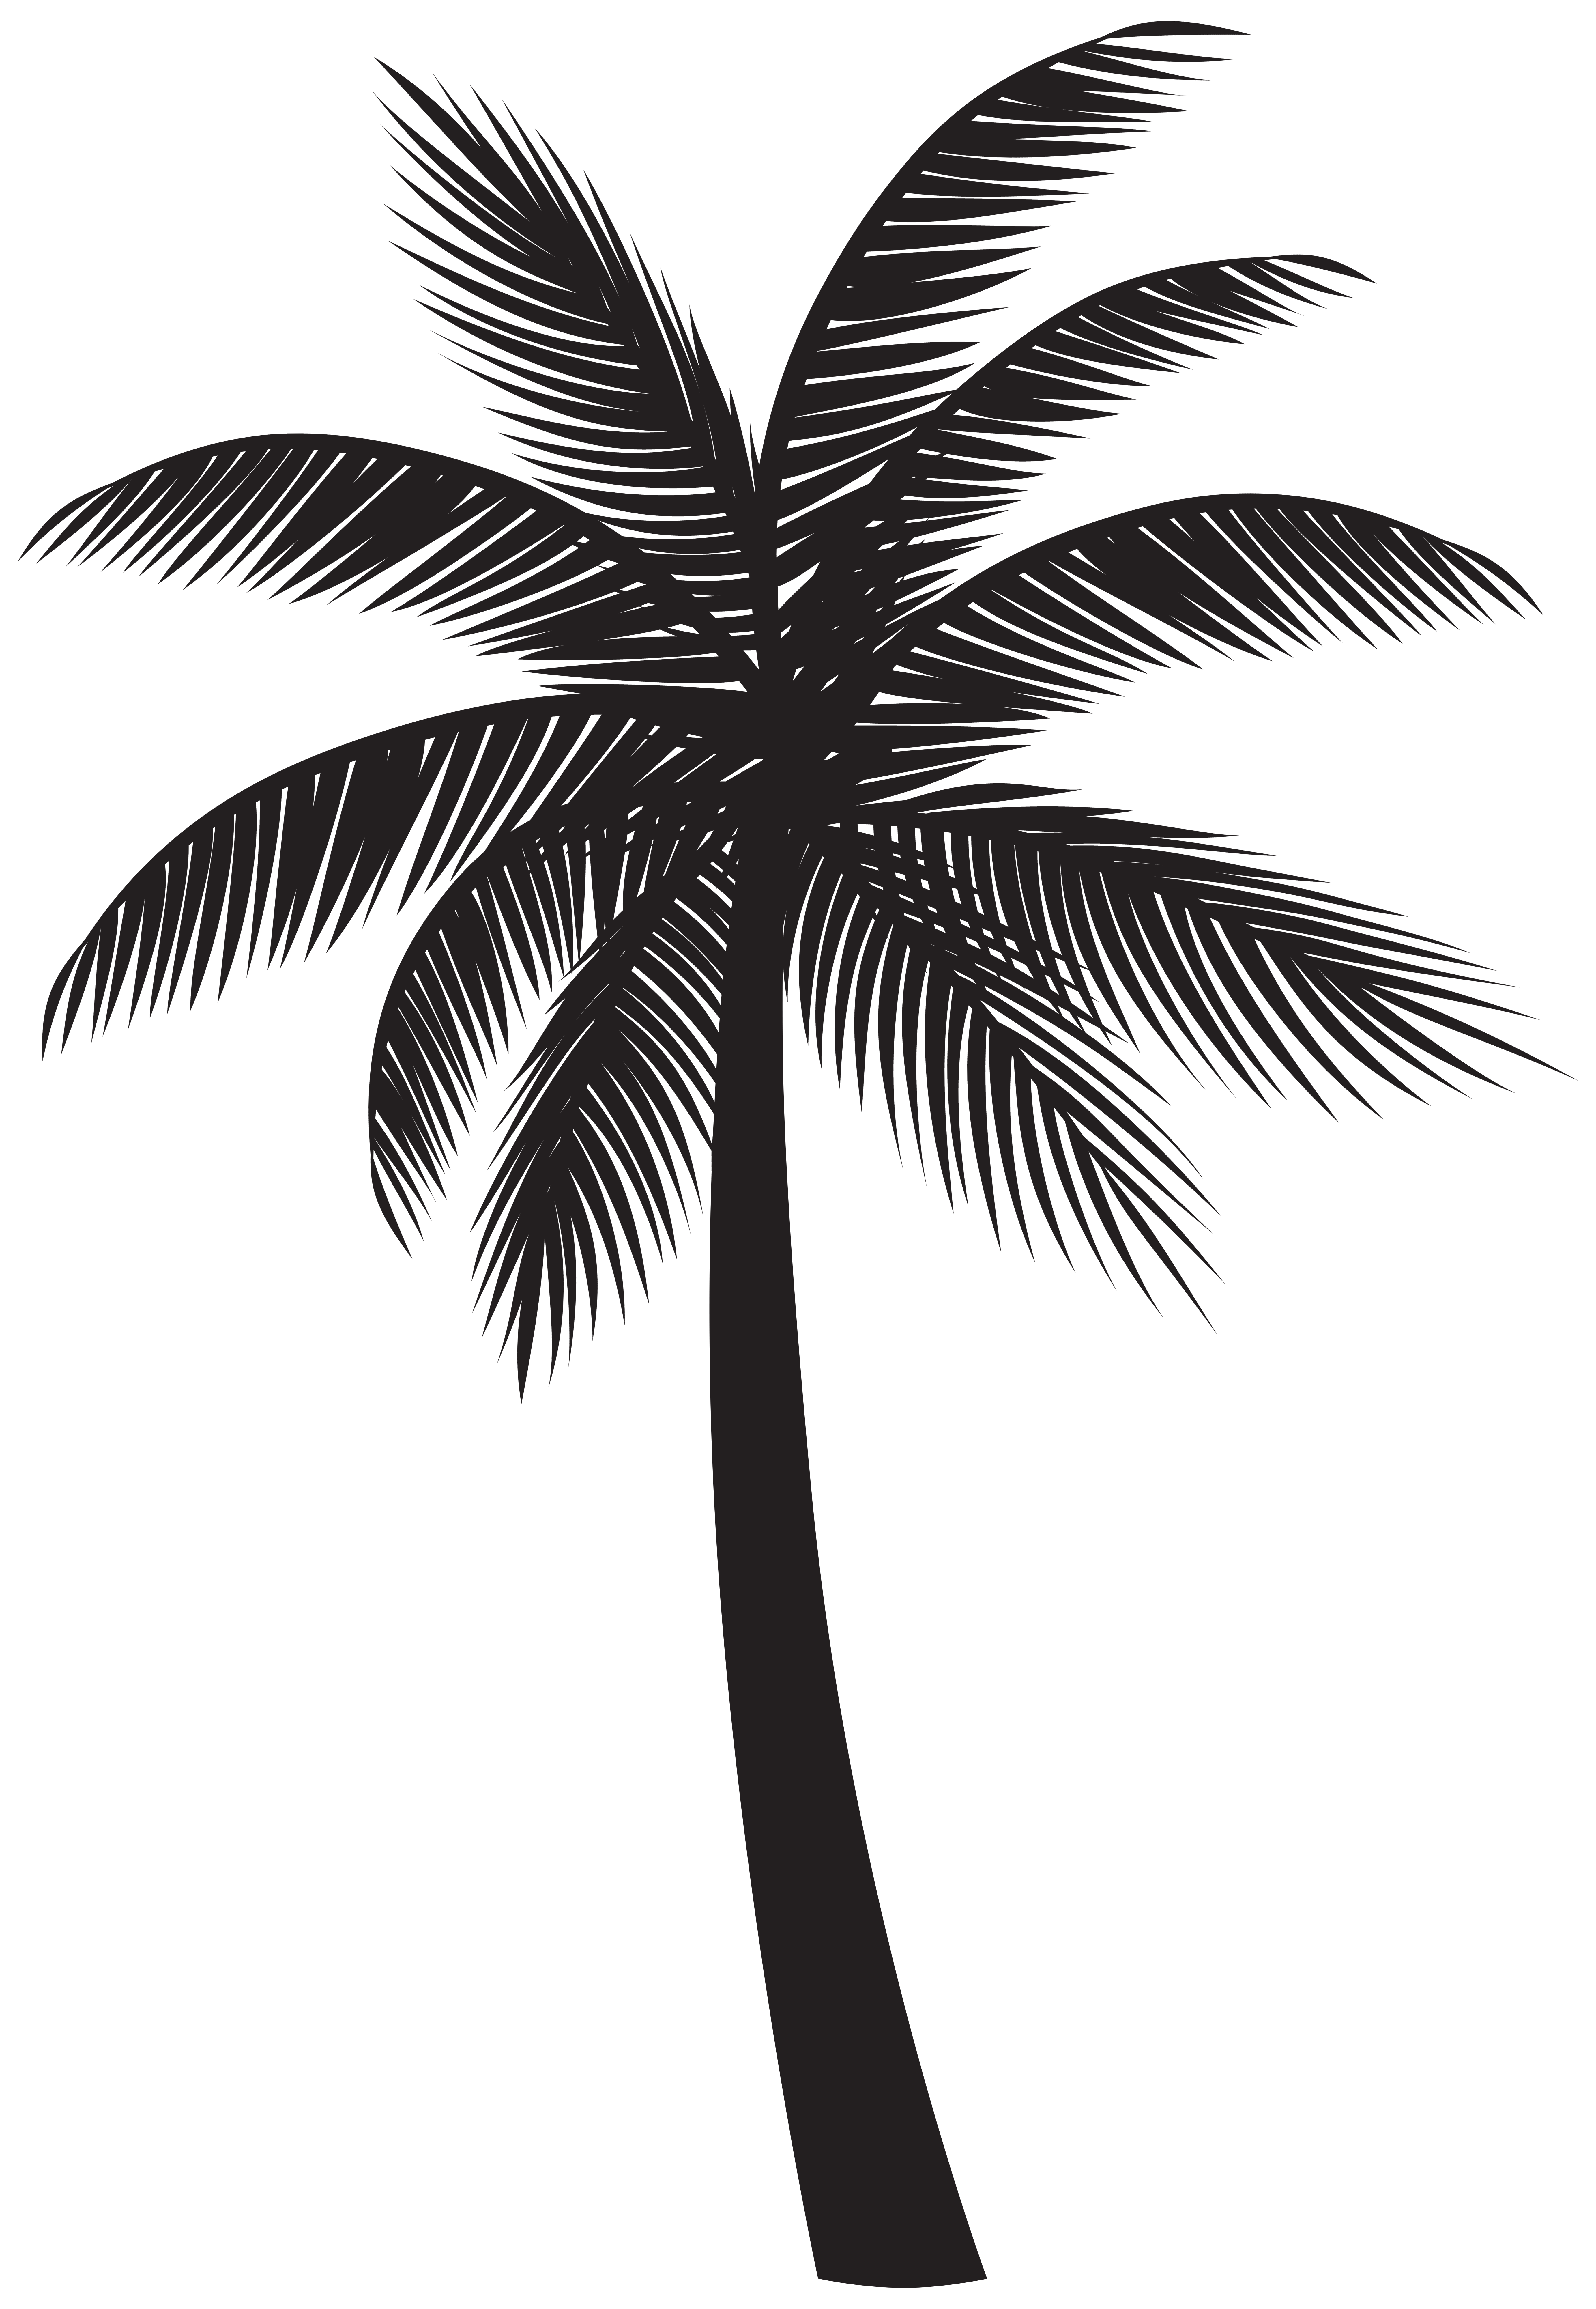 palm tree silhouette png